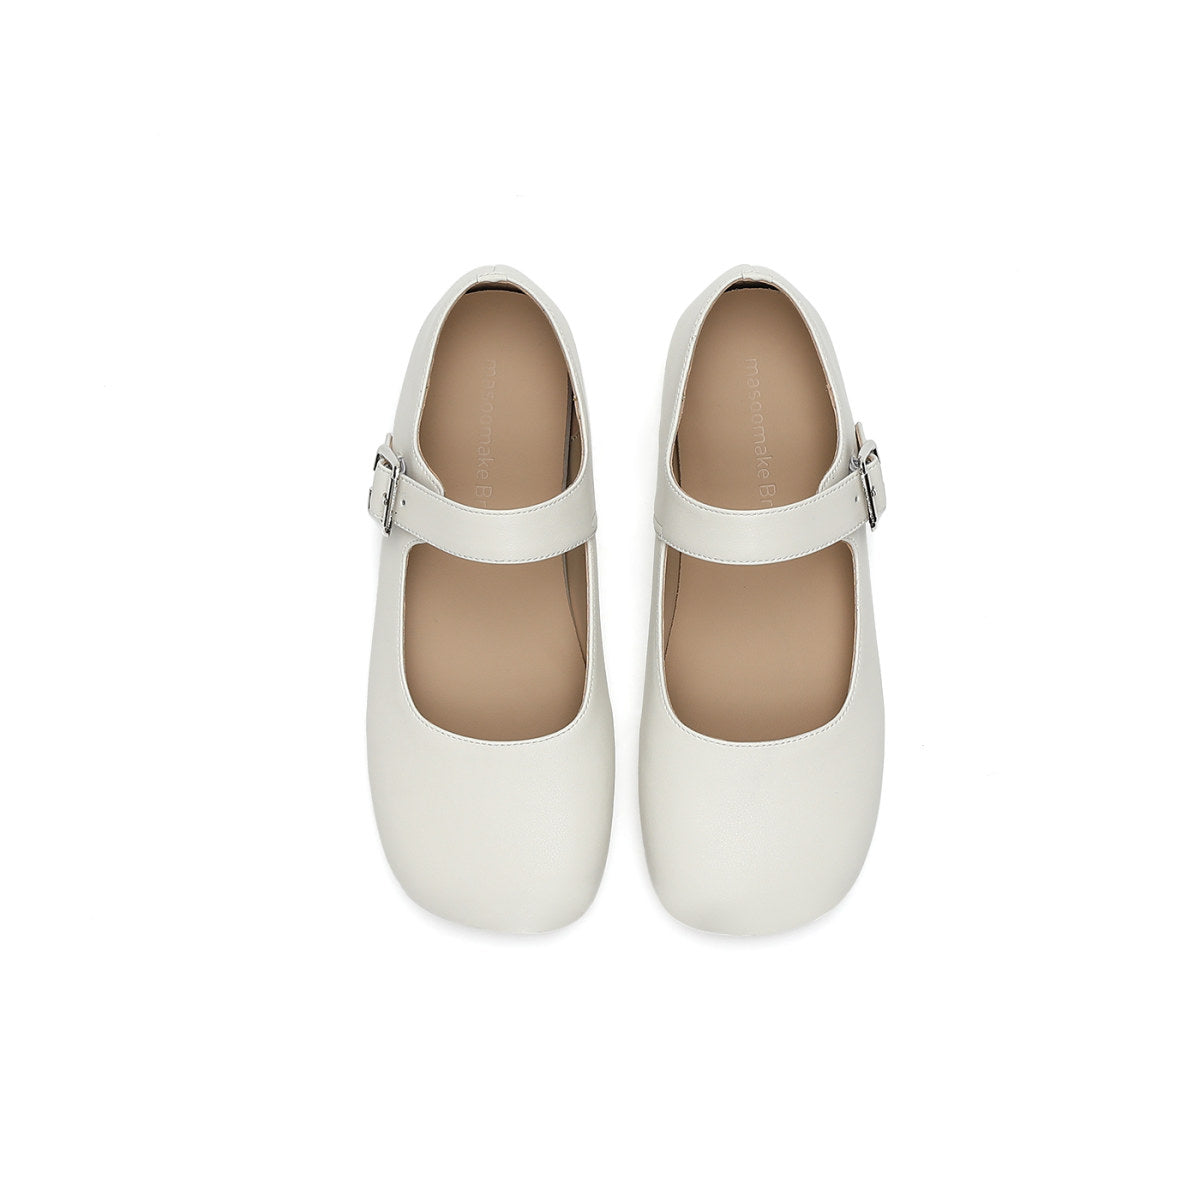 Jolie White Mary Jane Tap Shoes